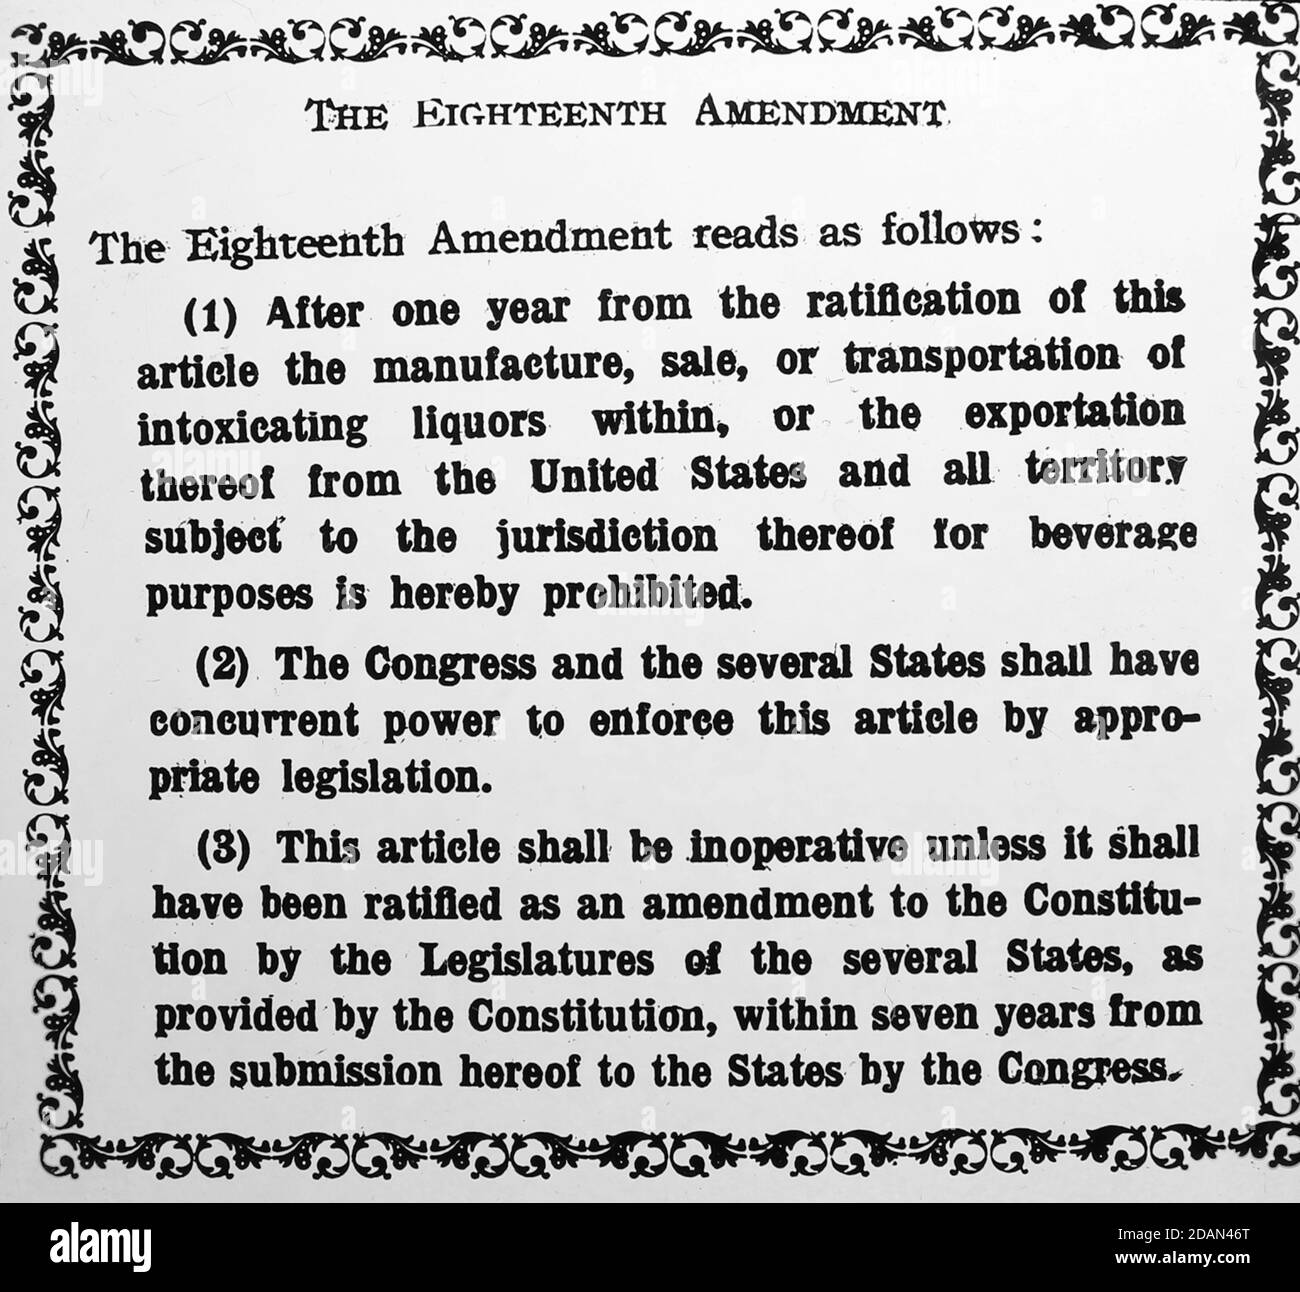 Prohibition message, the Eighteenth Amendment, probably 1920s Stock Photo